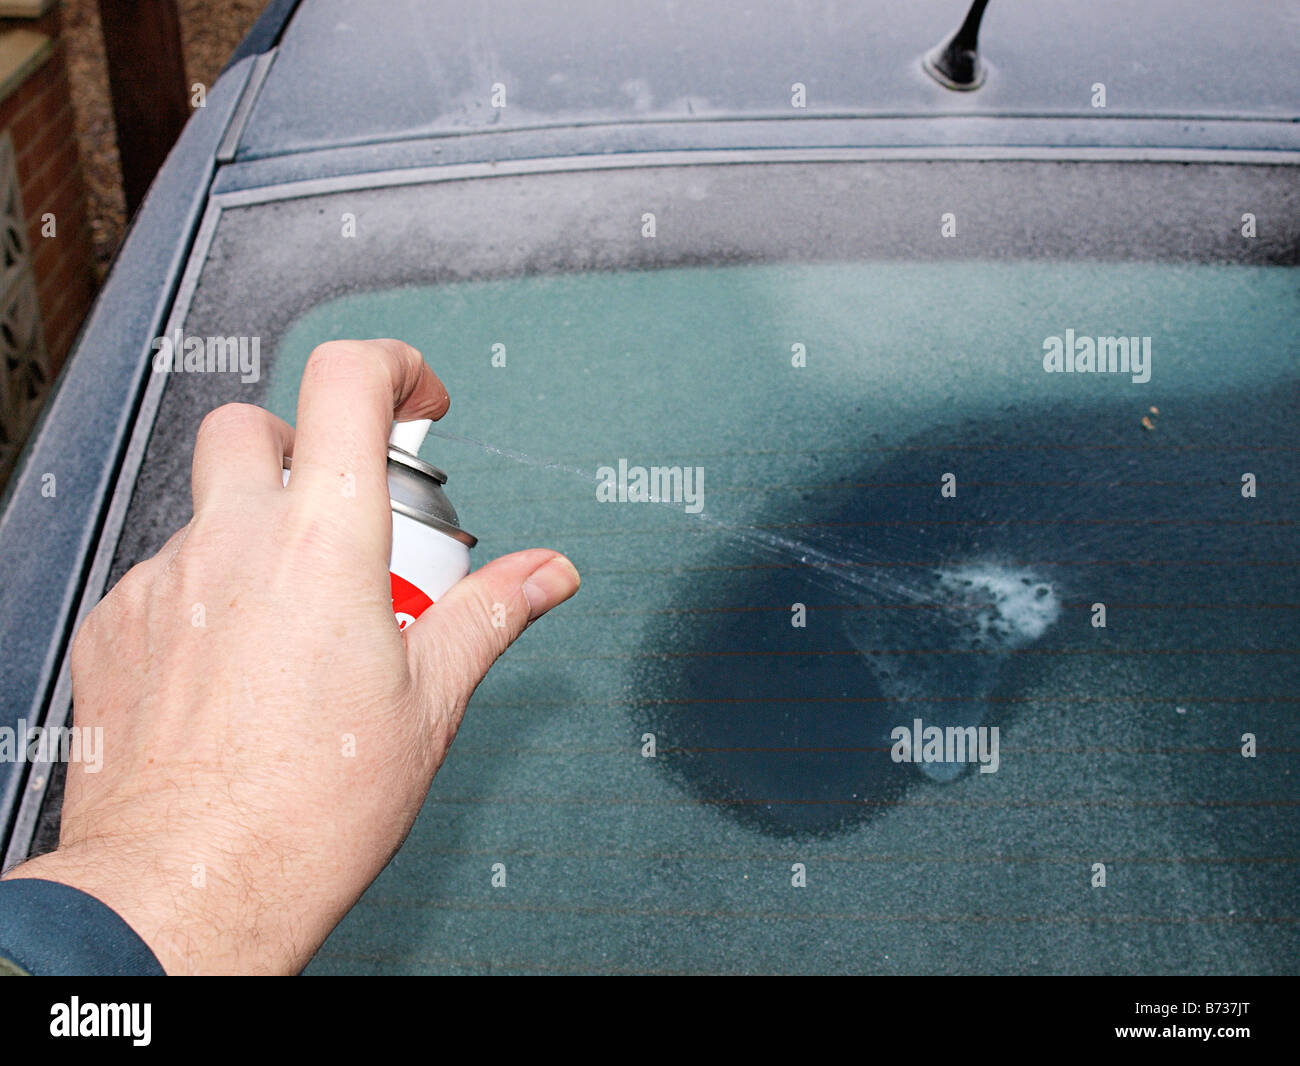 18 Spray To Defrost Windshield Images, Stock Photos, 3D objects, & Vectors